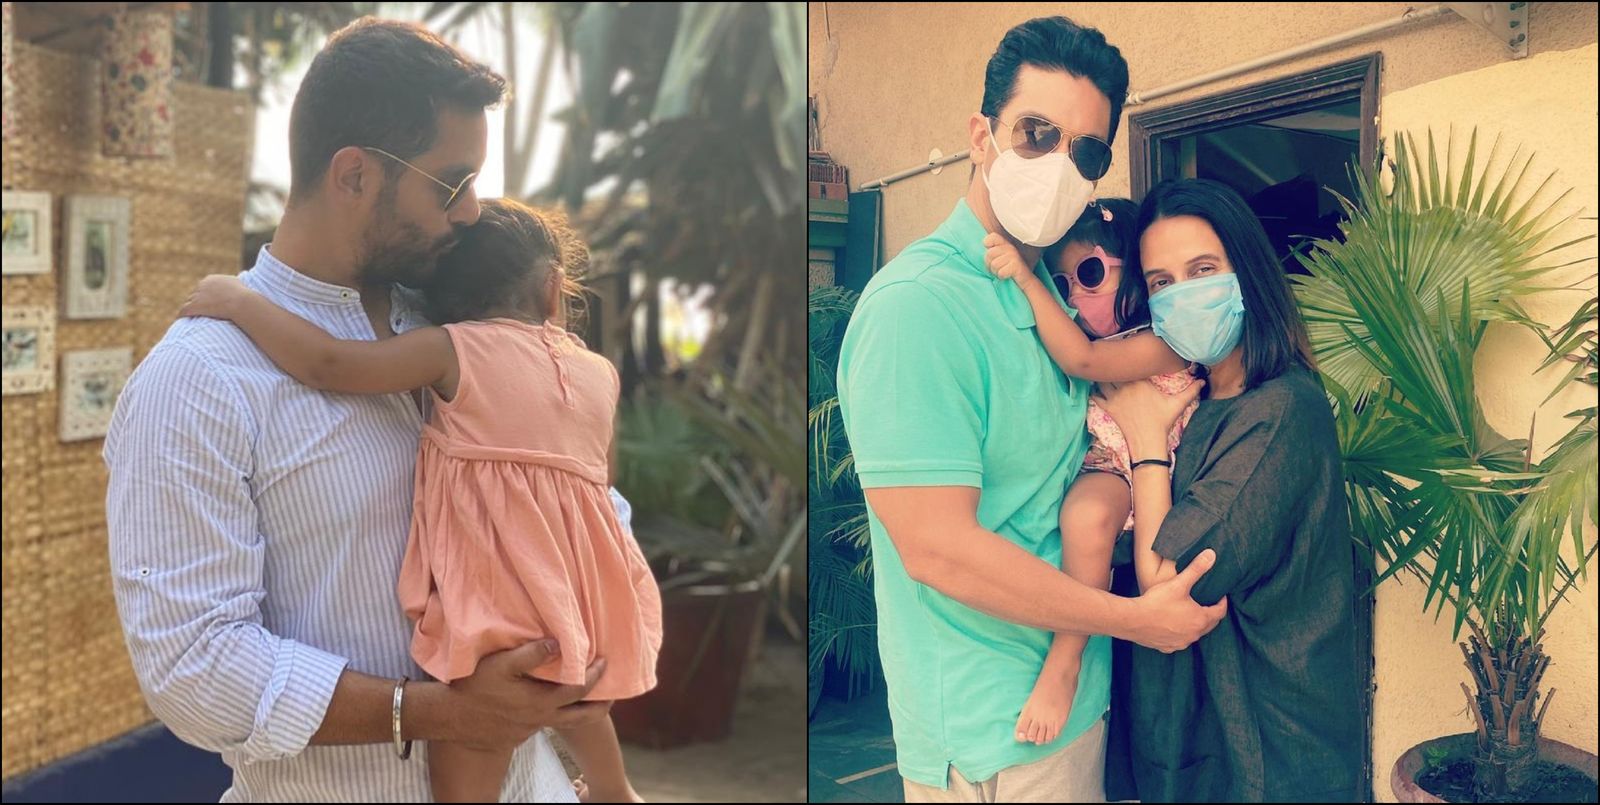 Angad Bedi Shares A Heartwarming Video As He Reunites With Neha Dhupia And Daughter Mehr After 16 Days Of Isolation